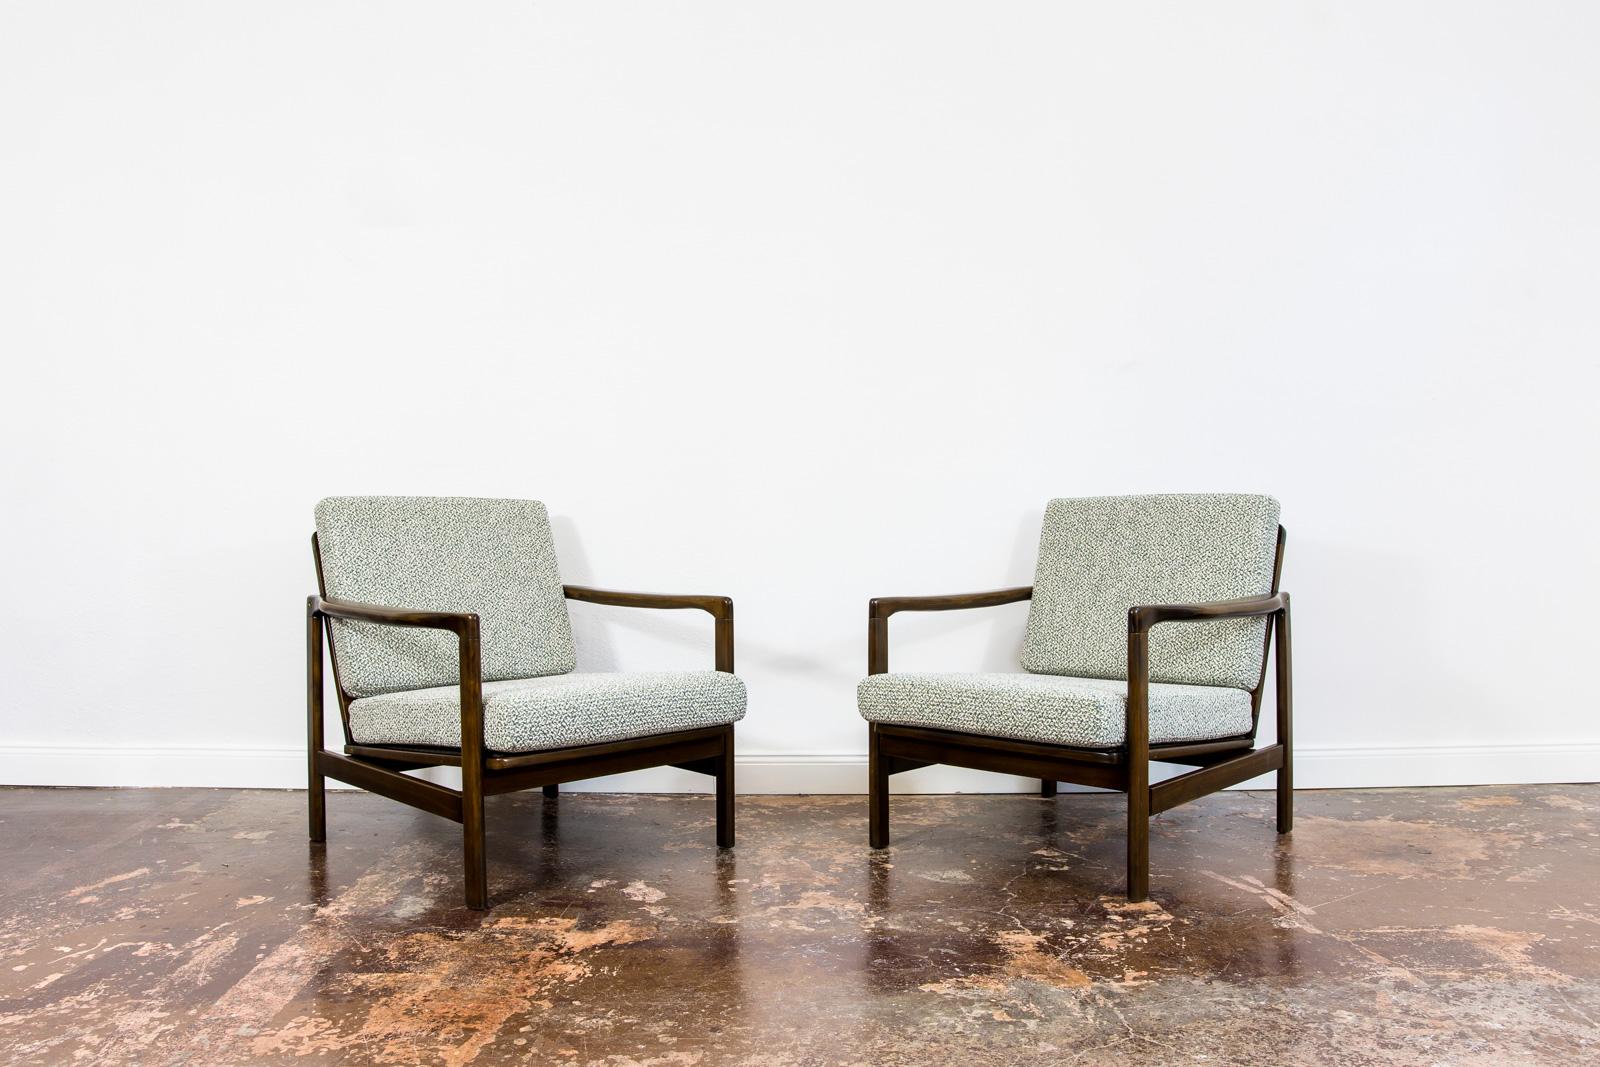 Pair Of Restored Armchairs By Zenon Bączyk type B7522 , 1960's. Poland
Reupholstered green and white woven fabric.
Solid wood frames have been completely restored and refinished.
We offer fabric customization upon request.